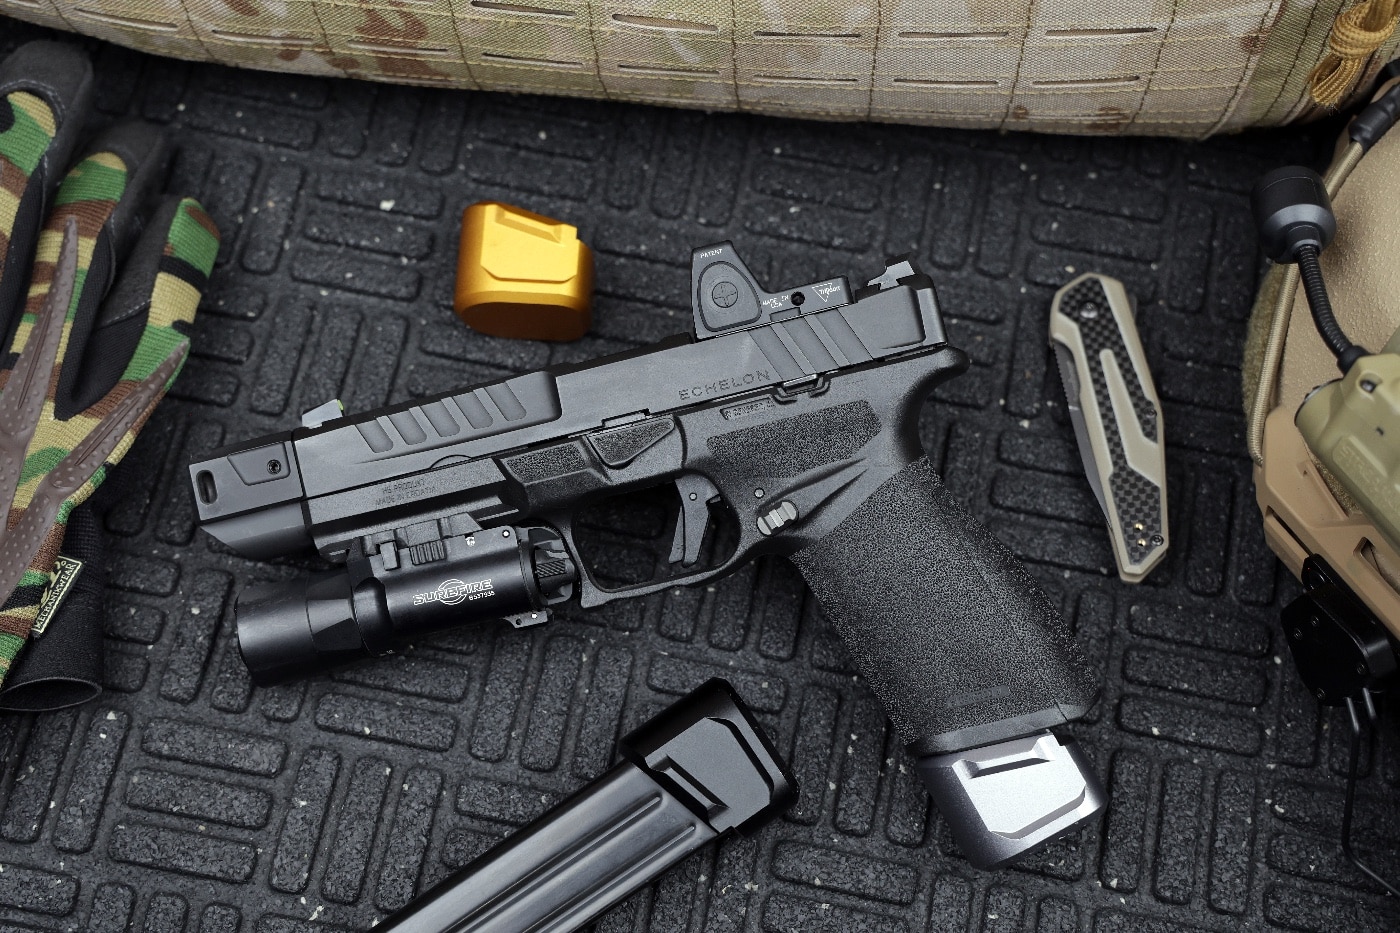 Shown here are a magazine release and extension from Tyrant CNC and a Patriot CNC compensator on a stock Echelon handgun. Tyrant CNC parts for Springfield Echelon pistol